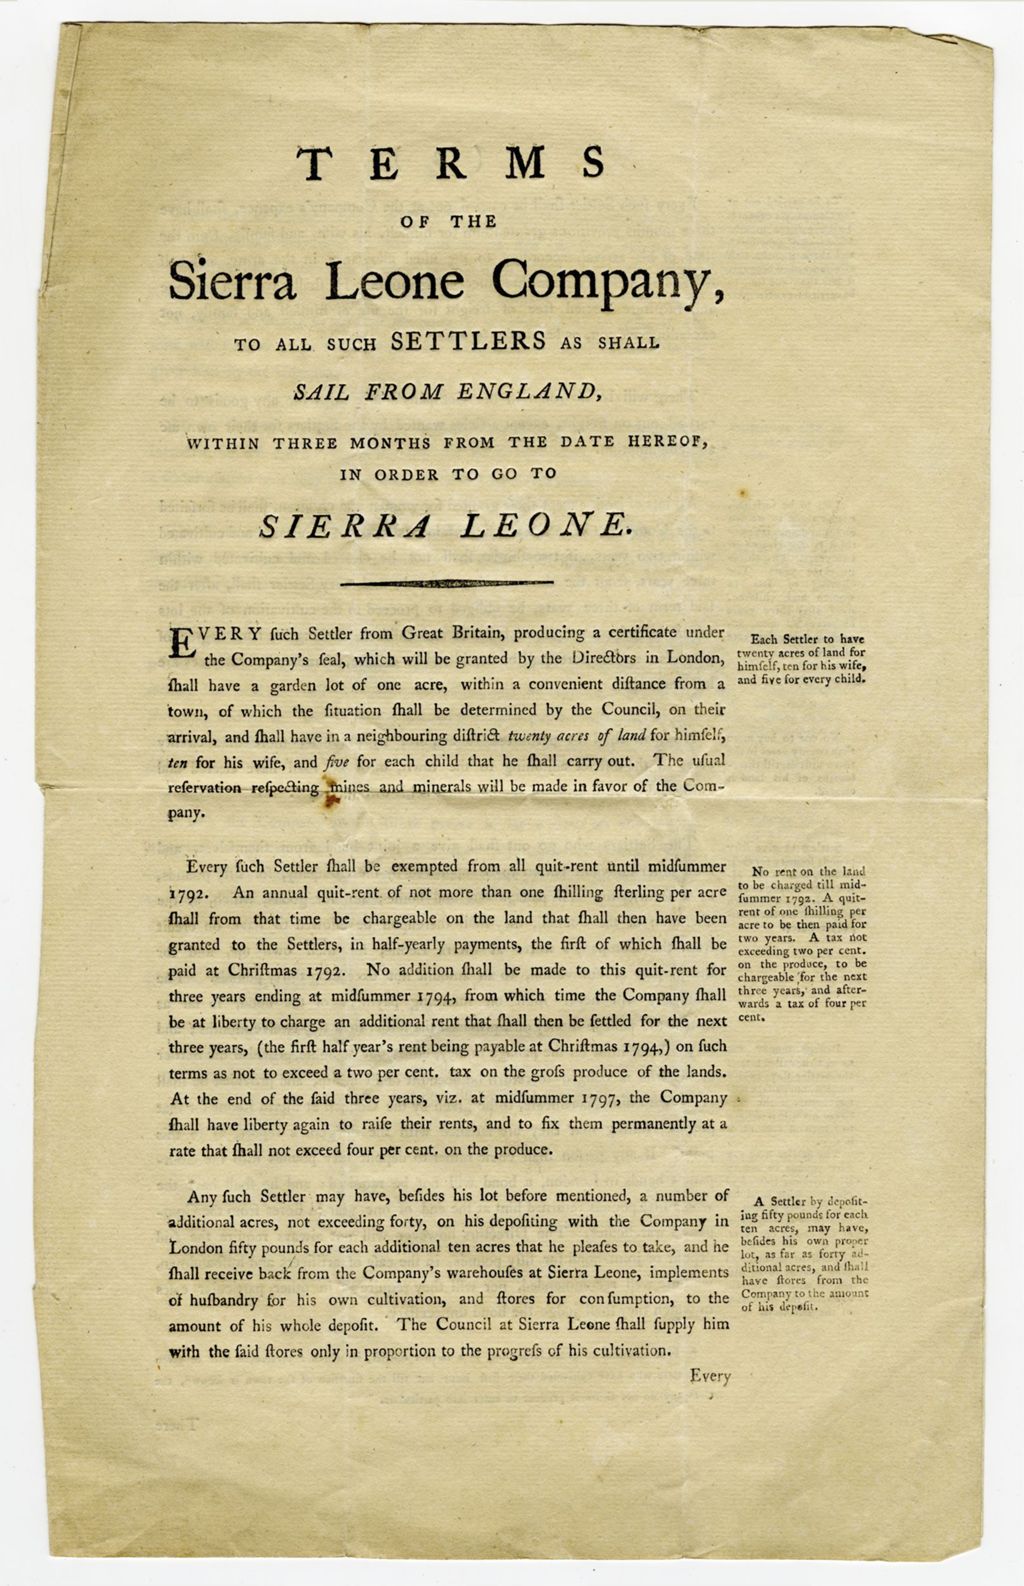 Miniature of Terms of the Sierra Leone Company